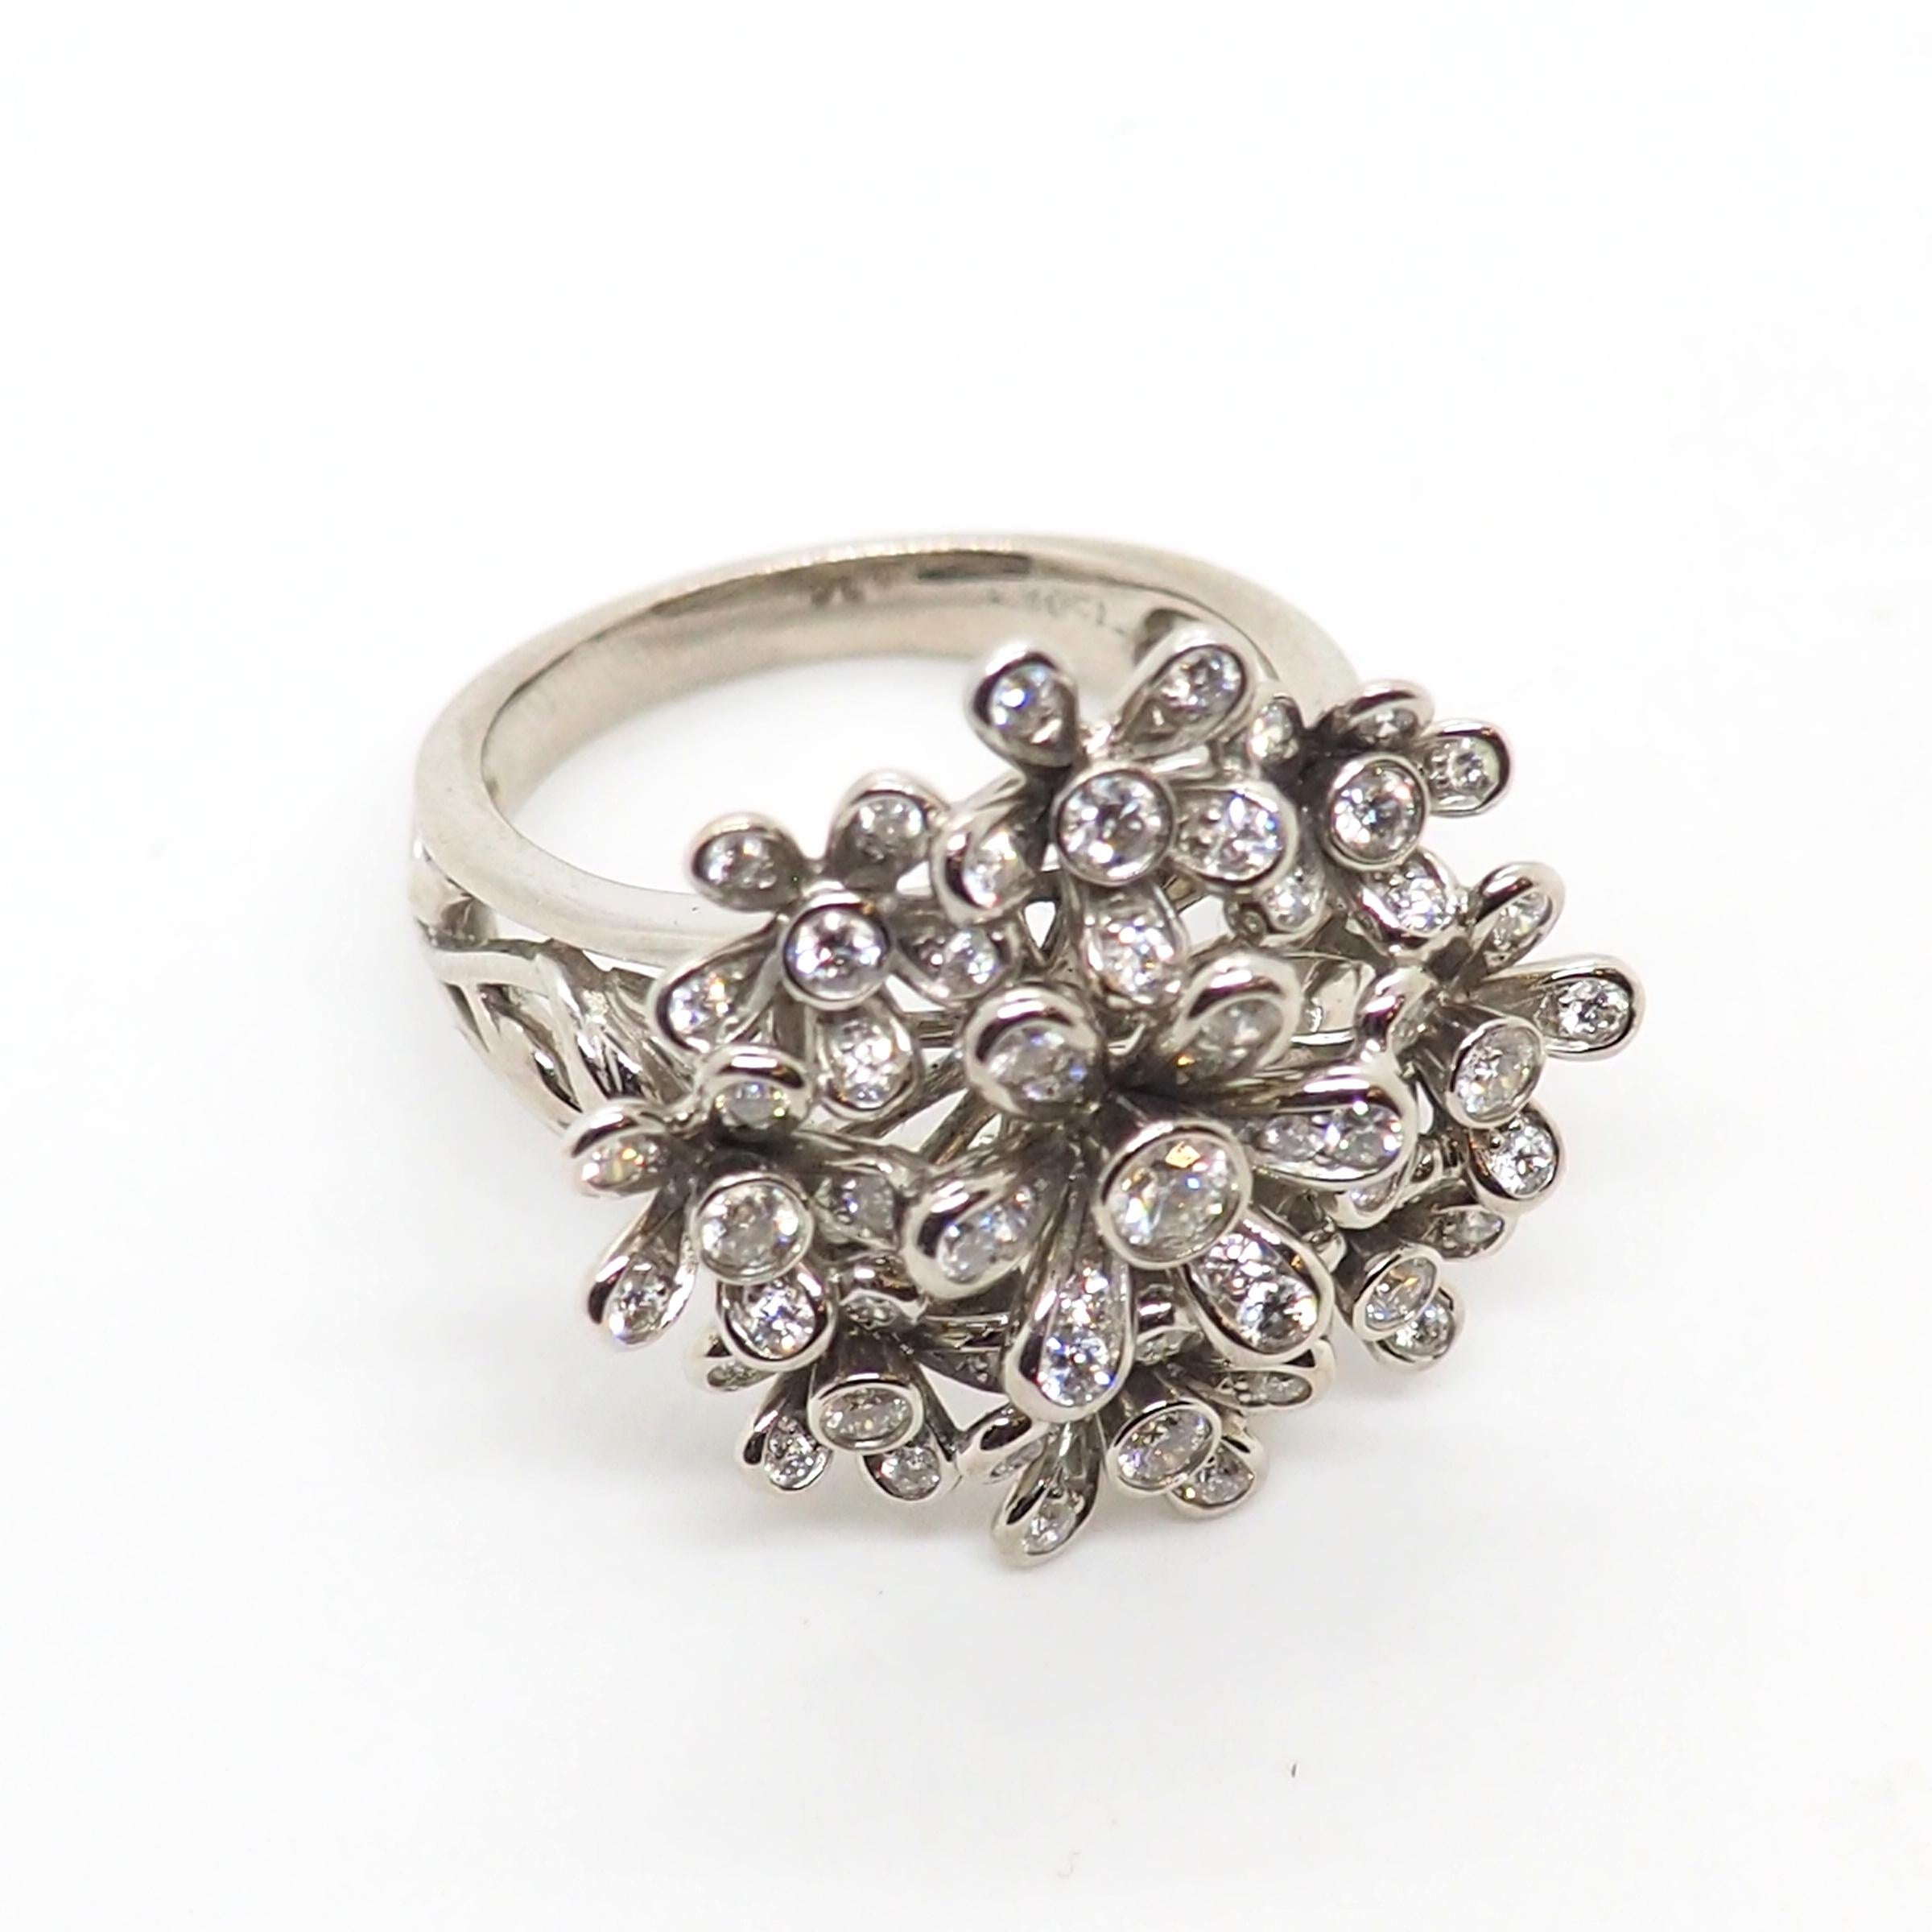 Contemporary fancy diamond flower ring made of 18k white gold. It features 3.5 carats of round brilliant cut diamonds approximately. 

Total weiht: 15 grams

European size: 58
American size: 8.4
Can be resized at the request of the buyer.

The ring